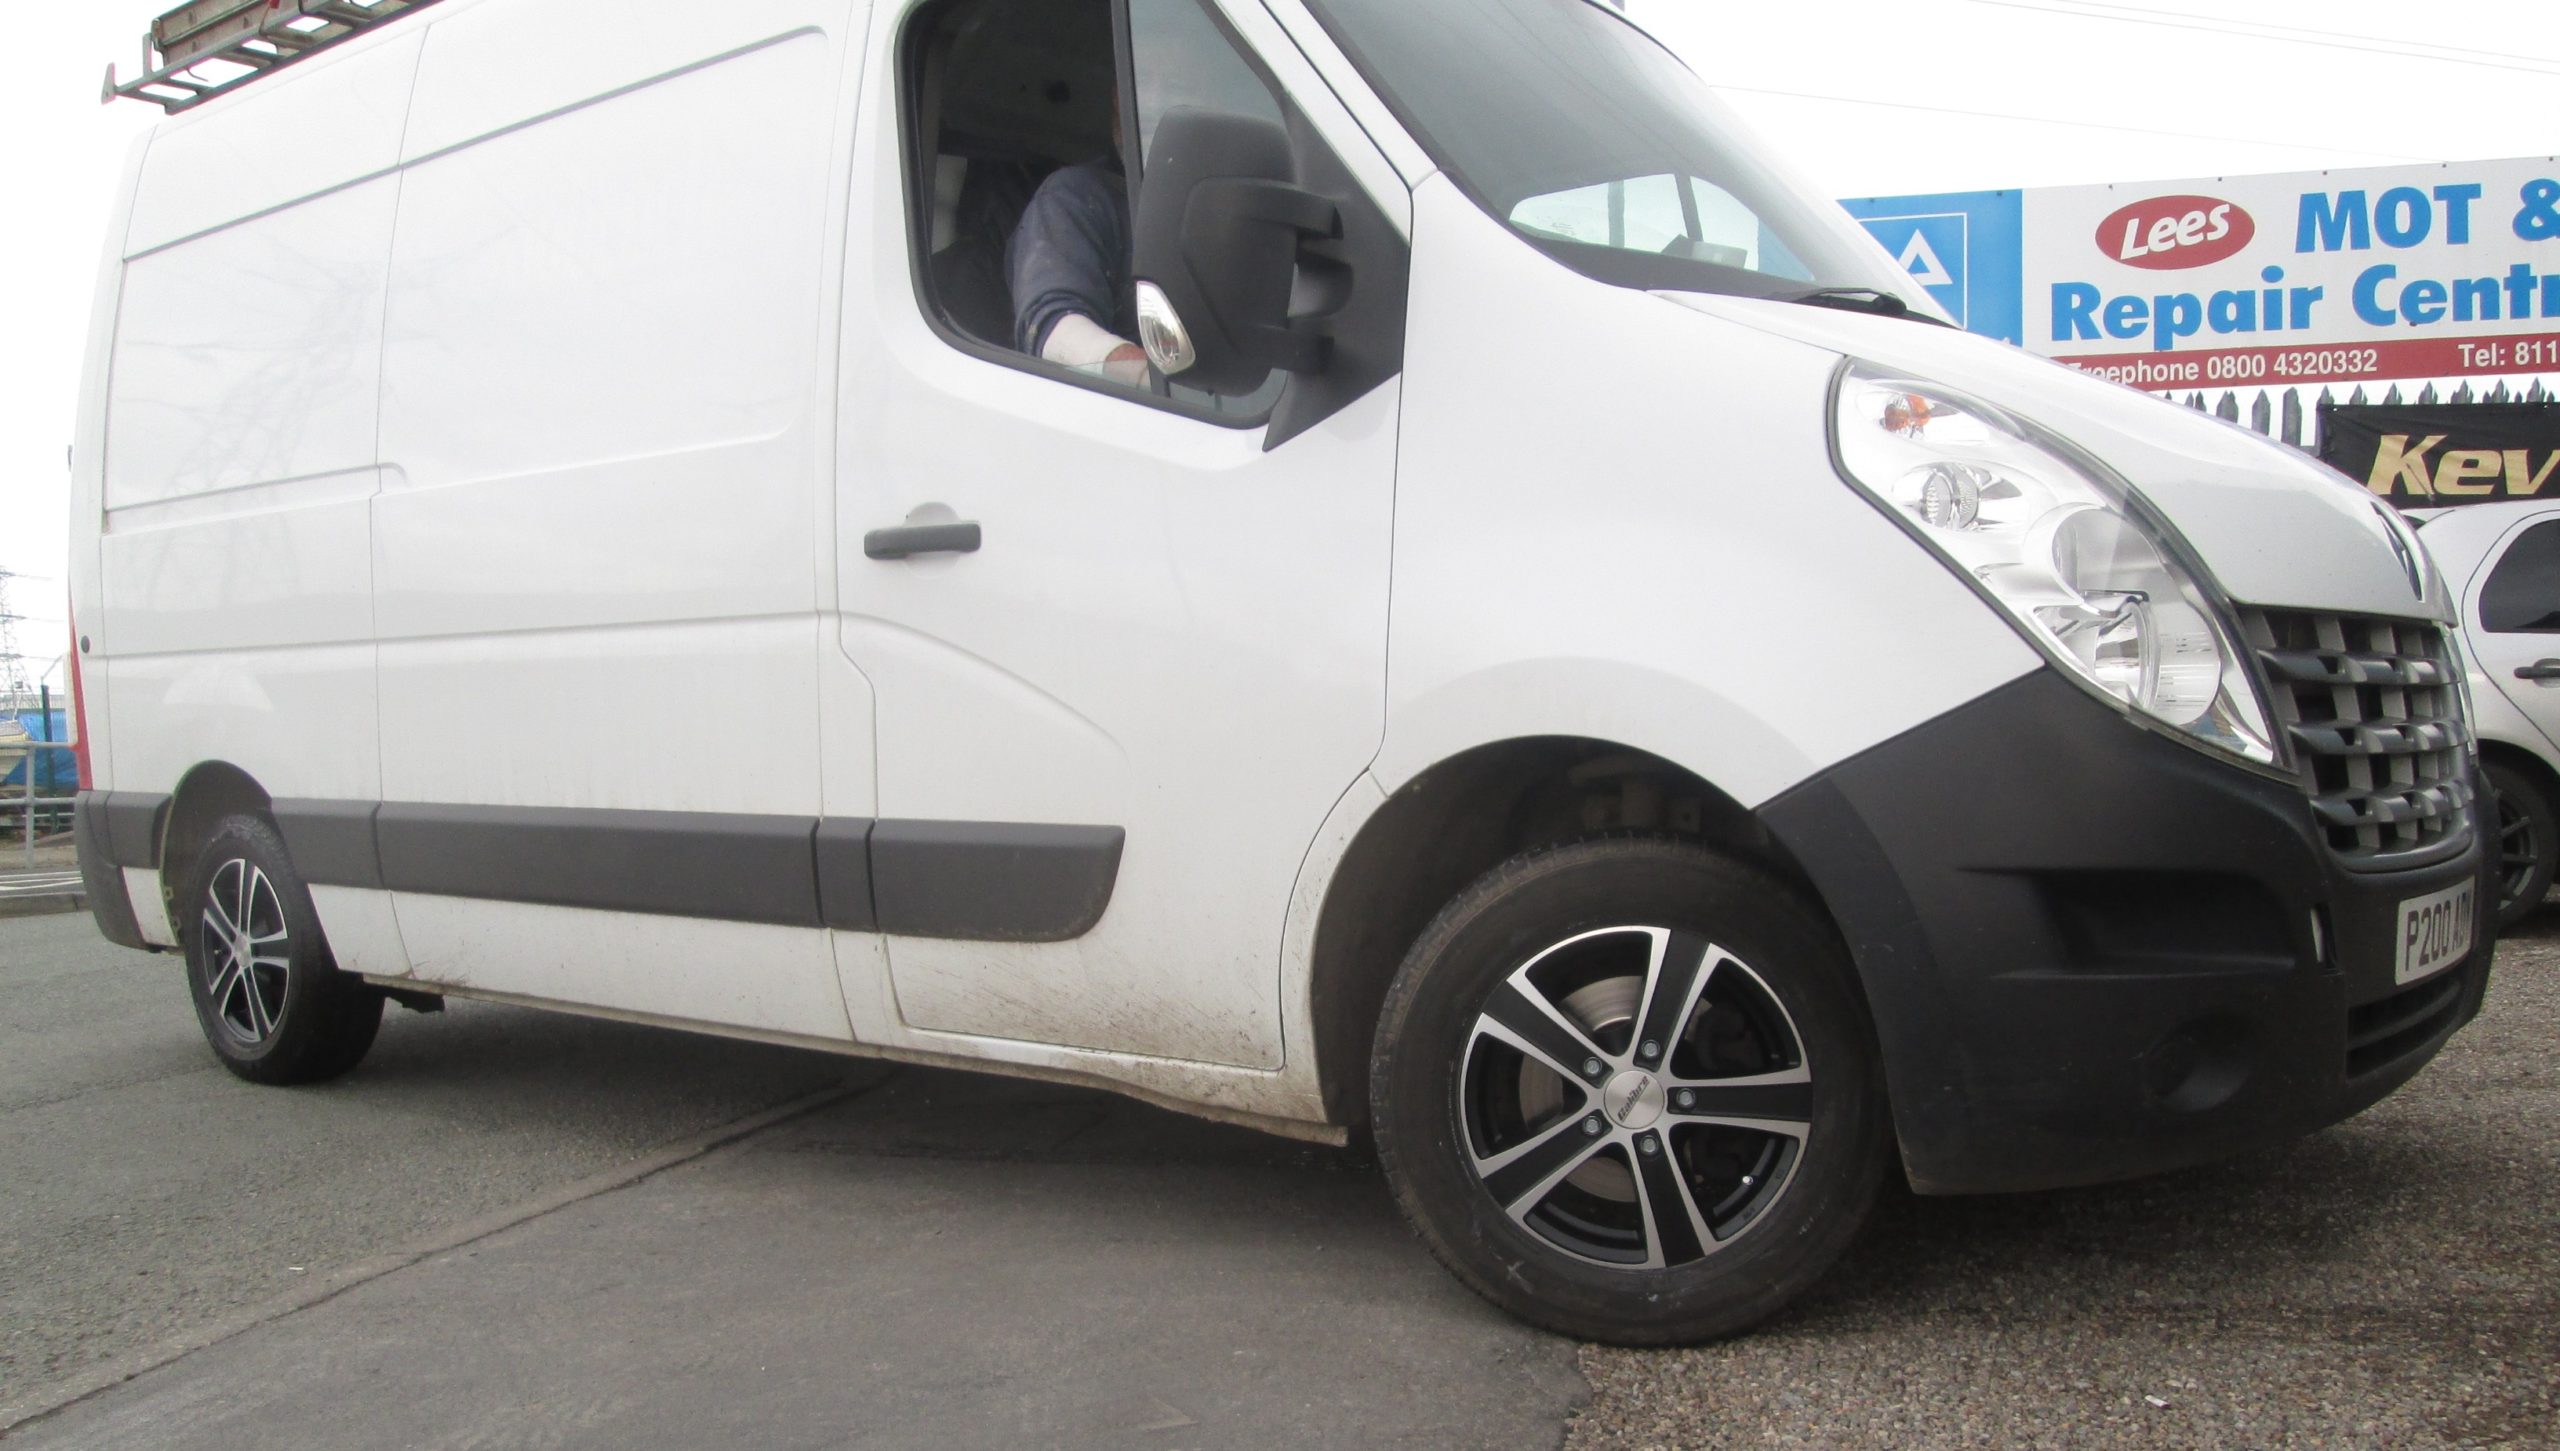 Calibre Hiway fitted to Renault Master